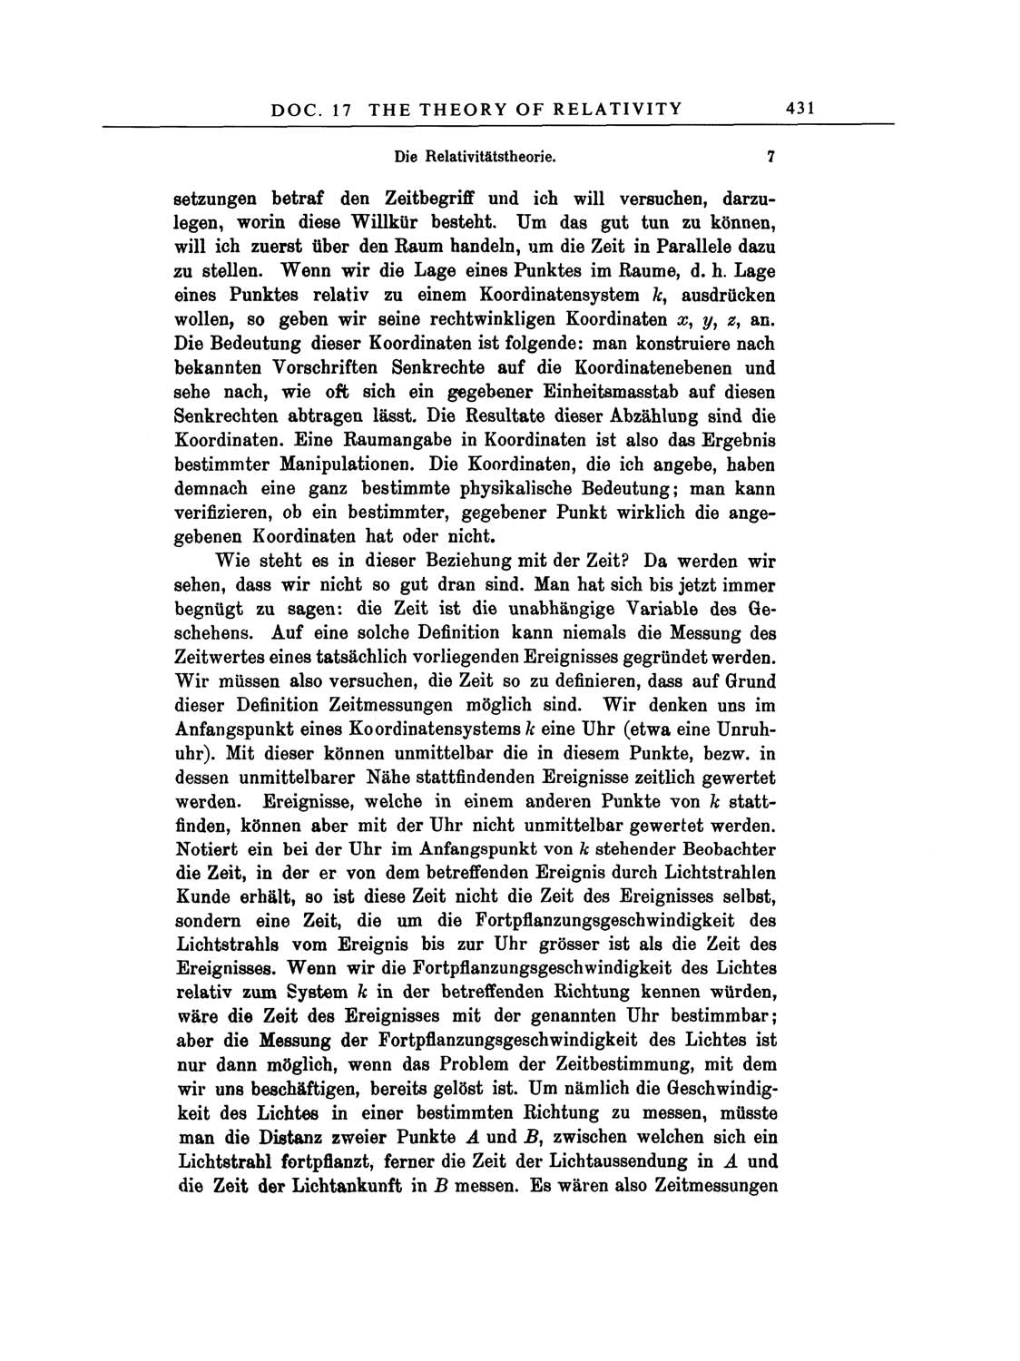 Volume 3: The Swiss Years: Writings 1909-1911 page 431